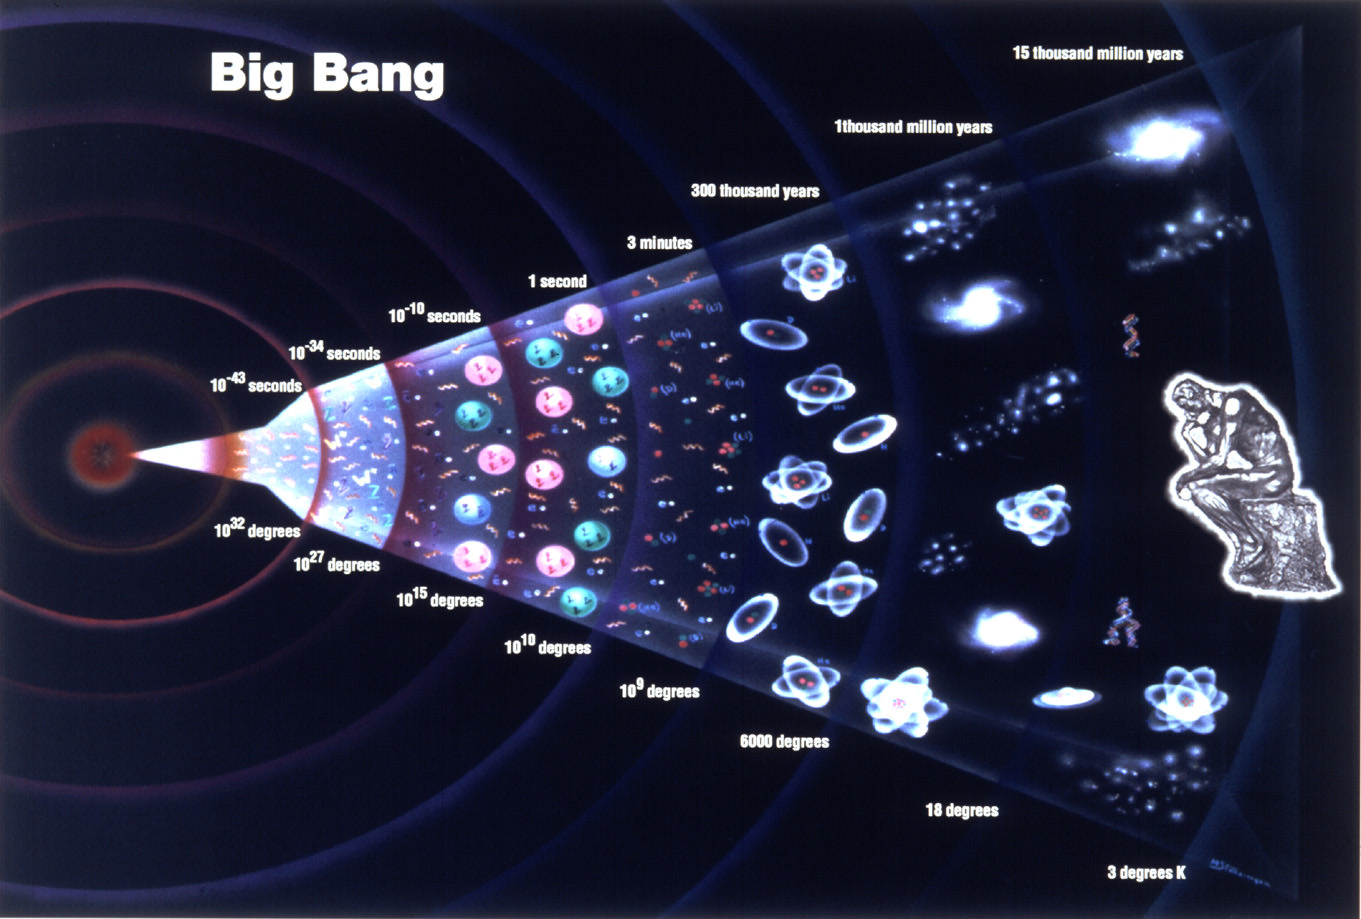 Big Bang Theory: Evolution of Our Universe